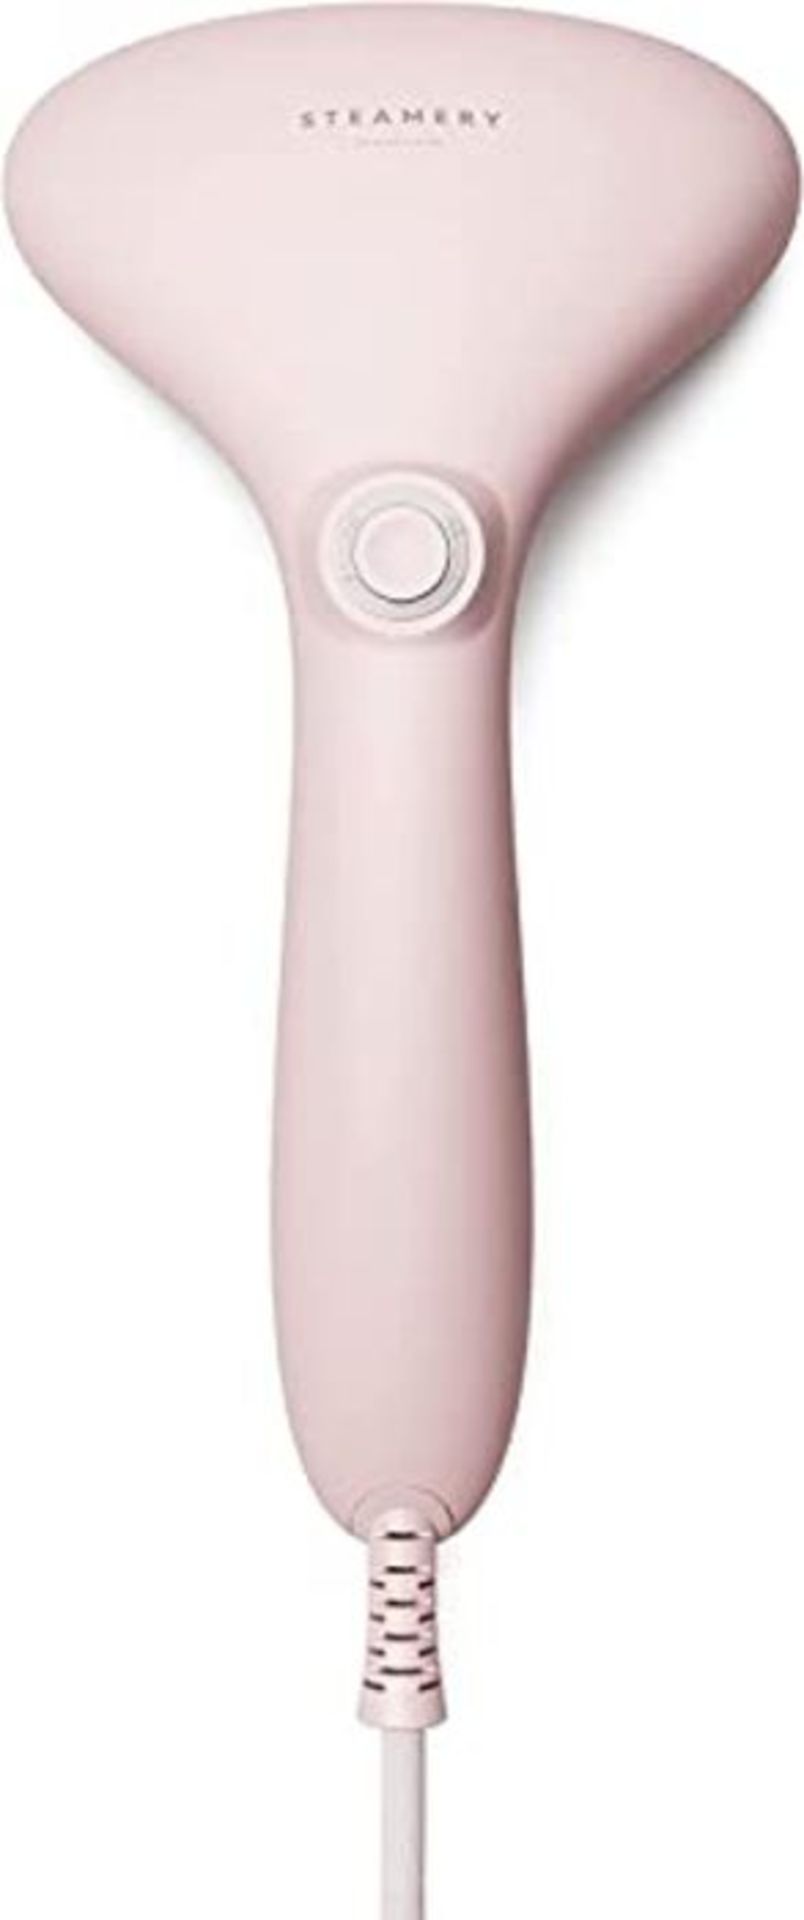 RRP £76.00 Steamery Handheld Clothes Steamer Cirrus 2, 1500W, UK Plug, Stainless Steel Mouthpiece